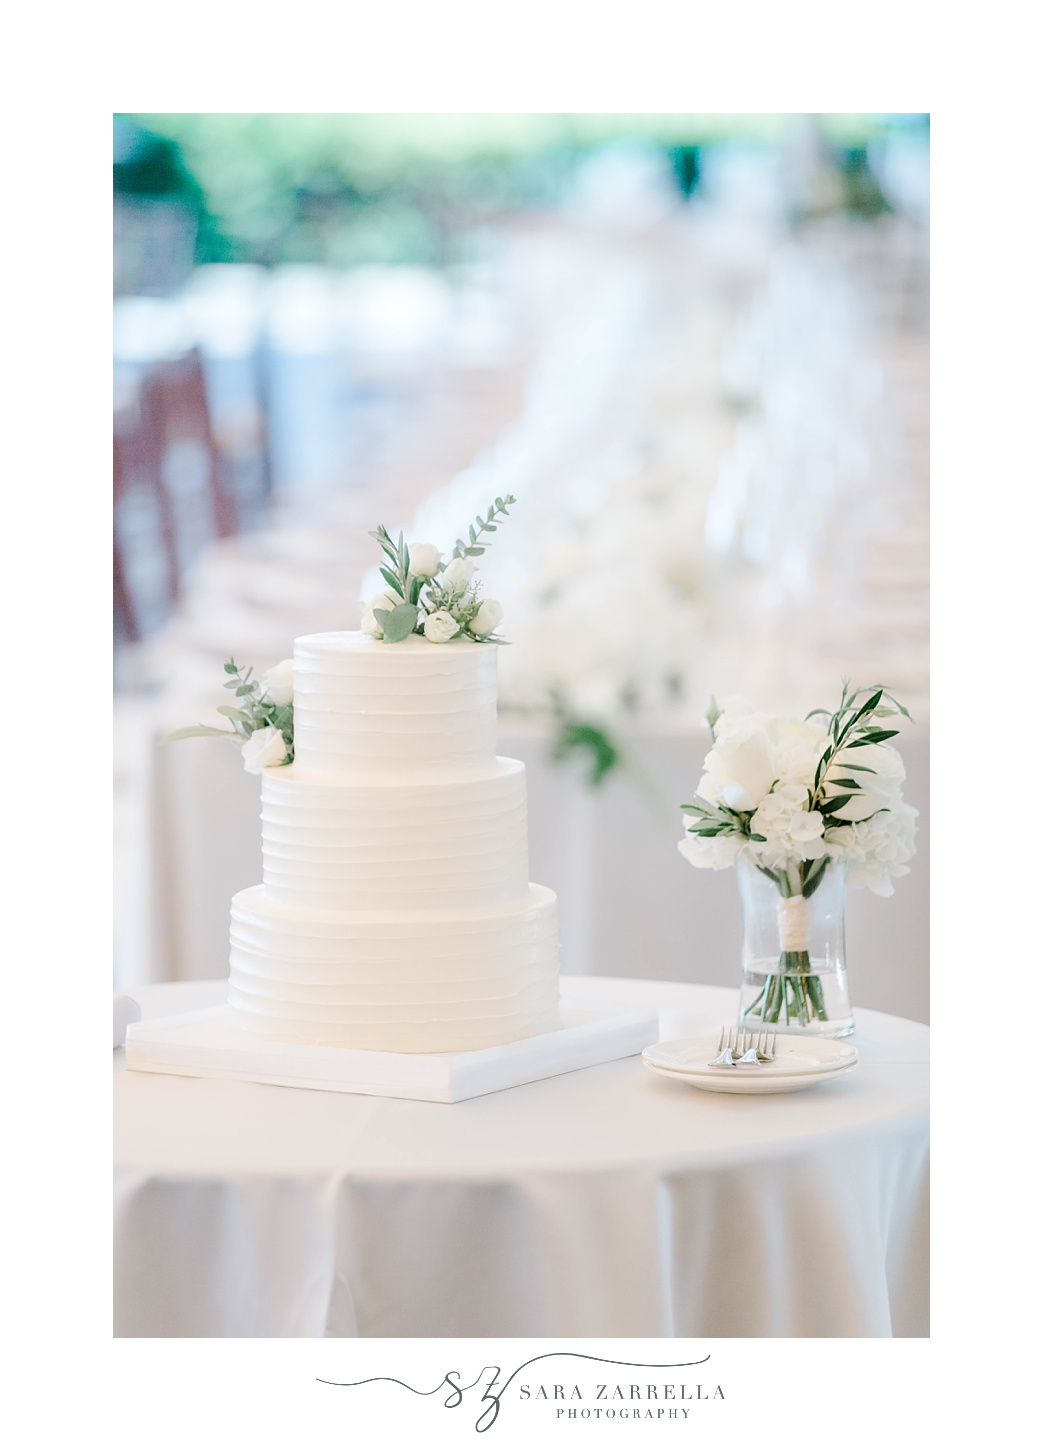 wedding cake sits on table with ivory flowers 